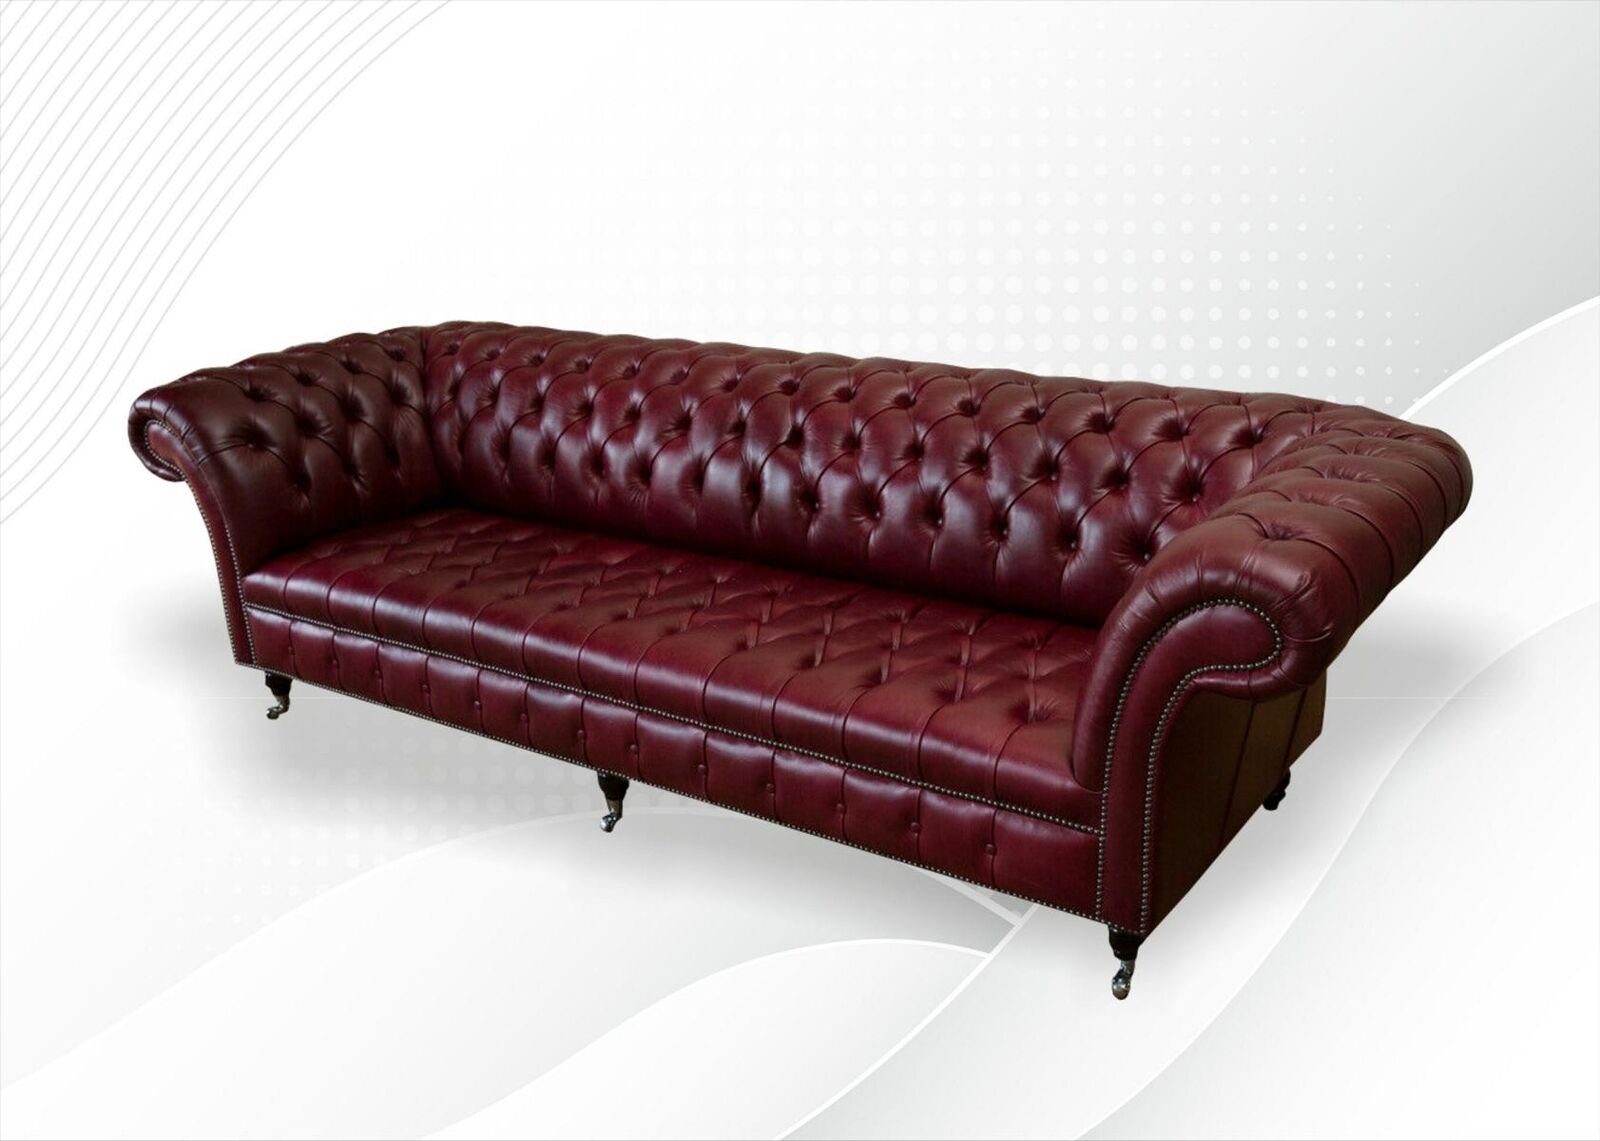 JVmoebel Chesterfield-Sofa Bordeaux Big Sofa Made in Sofort, 265cm Sofa Chesterfield 1 Teile, Couch 100% Leder Europa